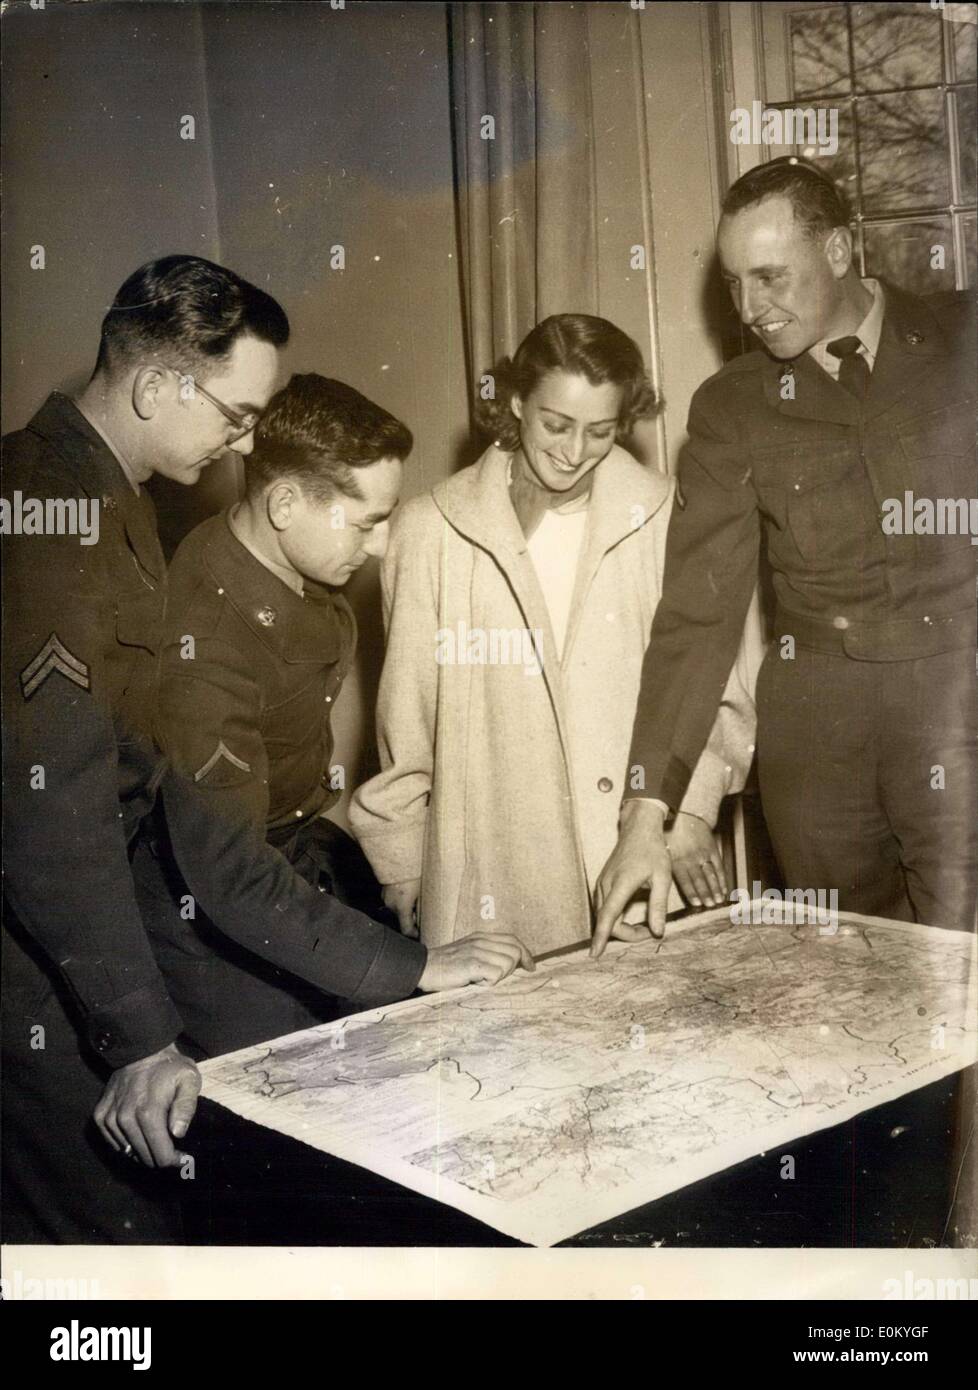 Nov. 26, 1952 - The end of walk.: Three G.I.'s and a German woman went out for a nice, little , walk, and, owing to conflicting Stock Photo